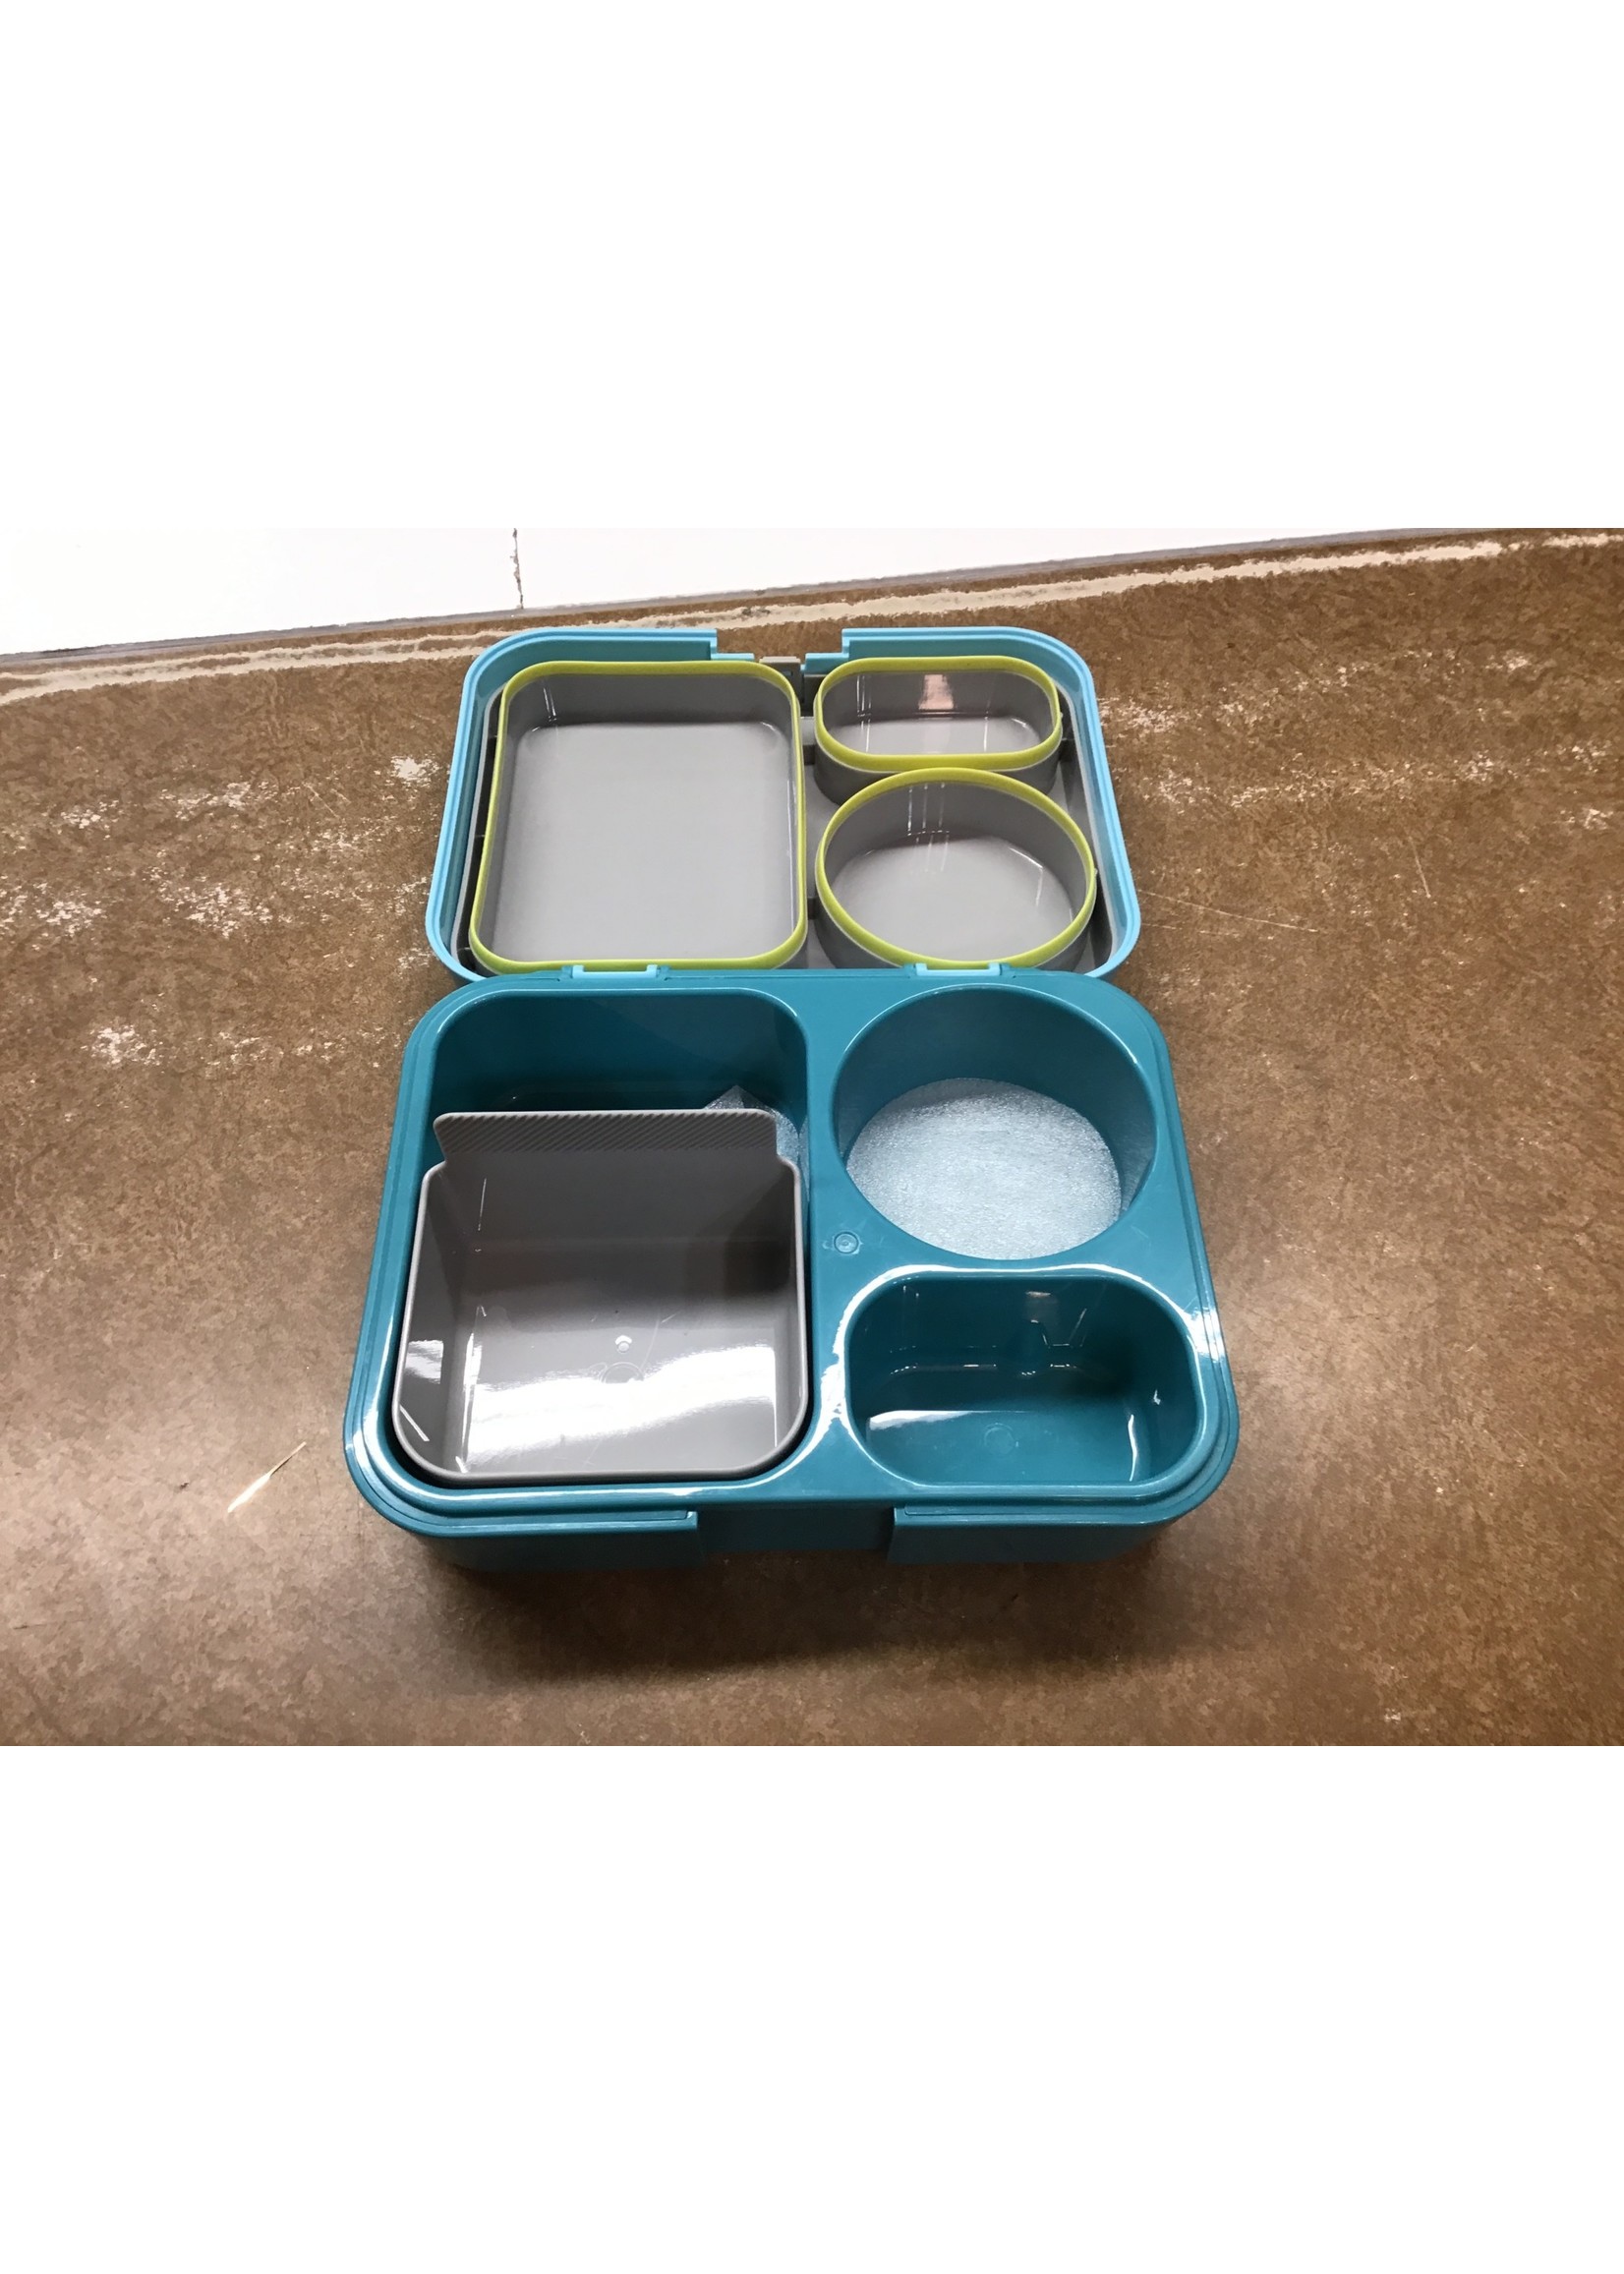 https://cdn.shoplightspeed.com/shops/633858/files/43693860/1652x2313x2/missing-containers-thermos-kids-freestyle-kit-teal.jpg